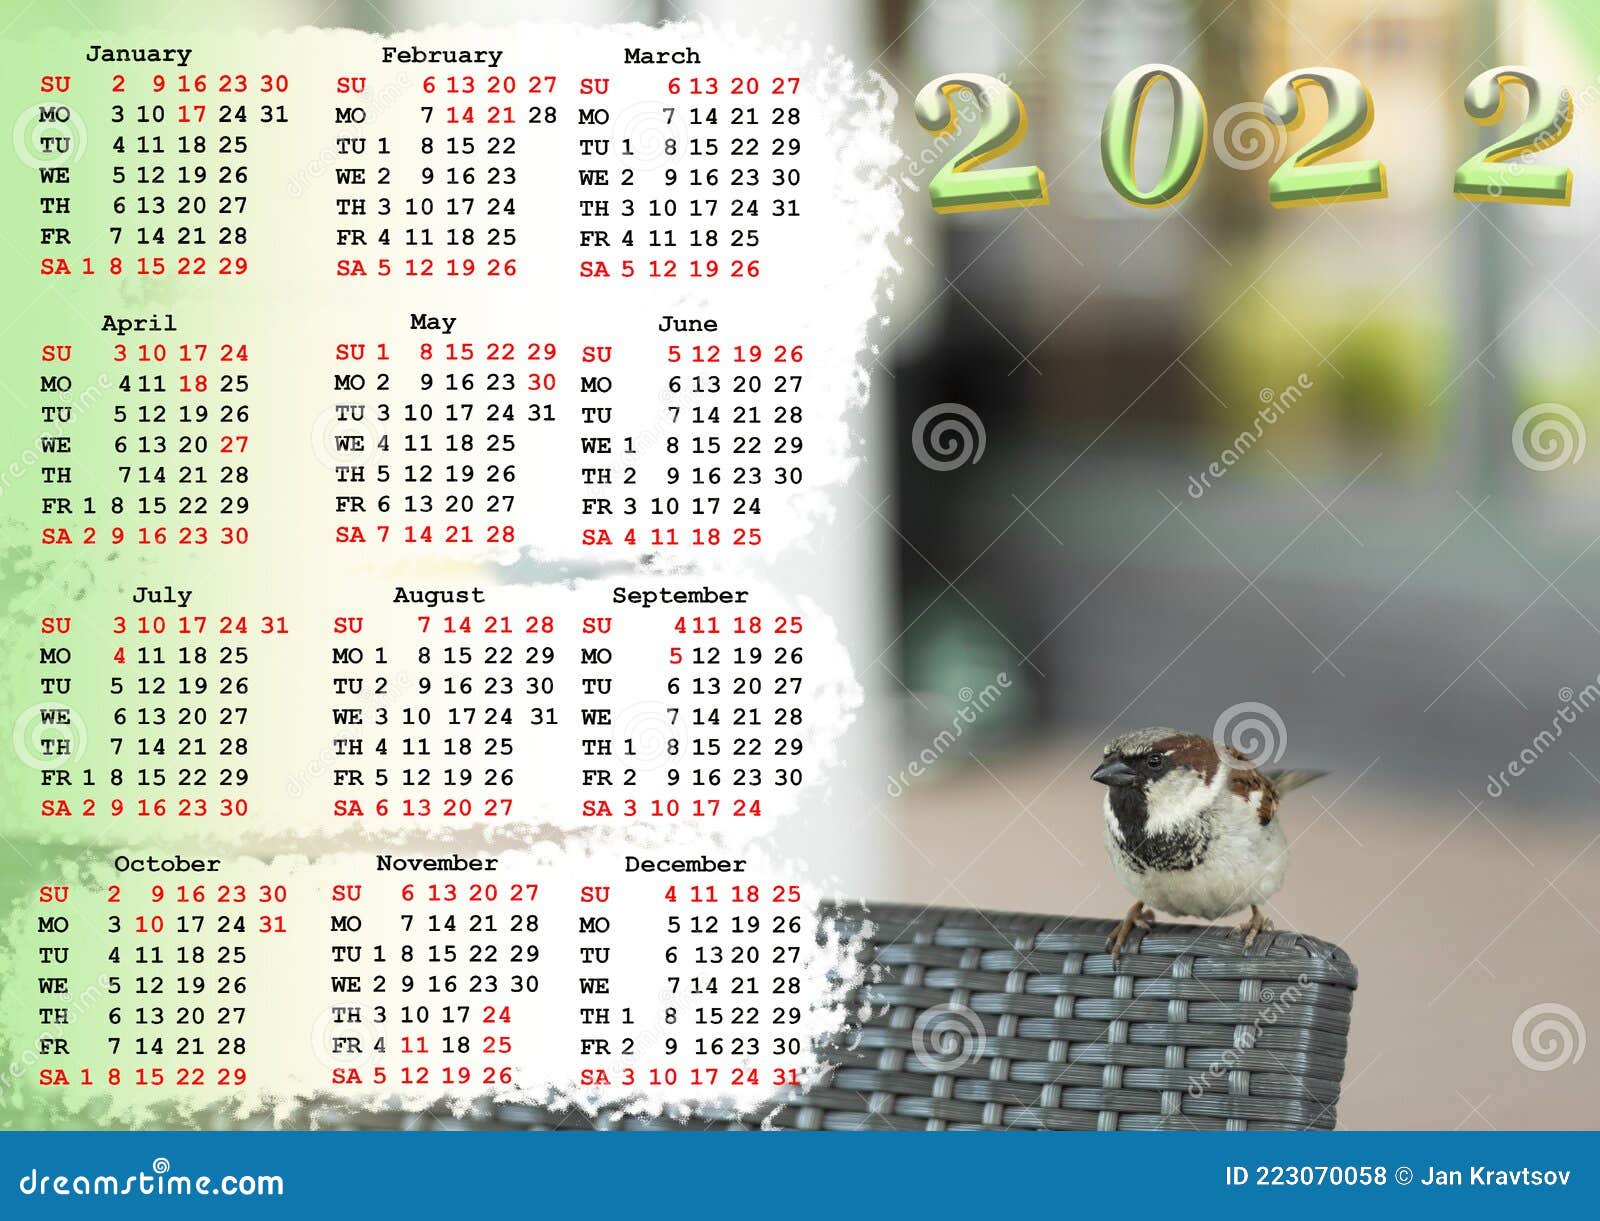 Calendar For 2022 With Us Holidays Calendar With A Picture Of A Sparrow Stock Photo Image Of Date Feathered 223070058